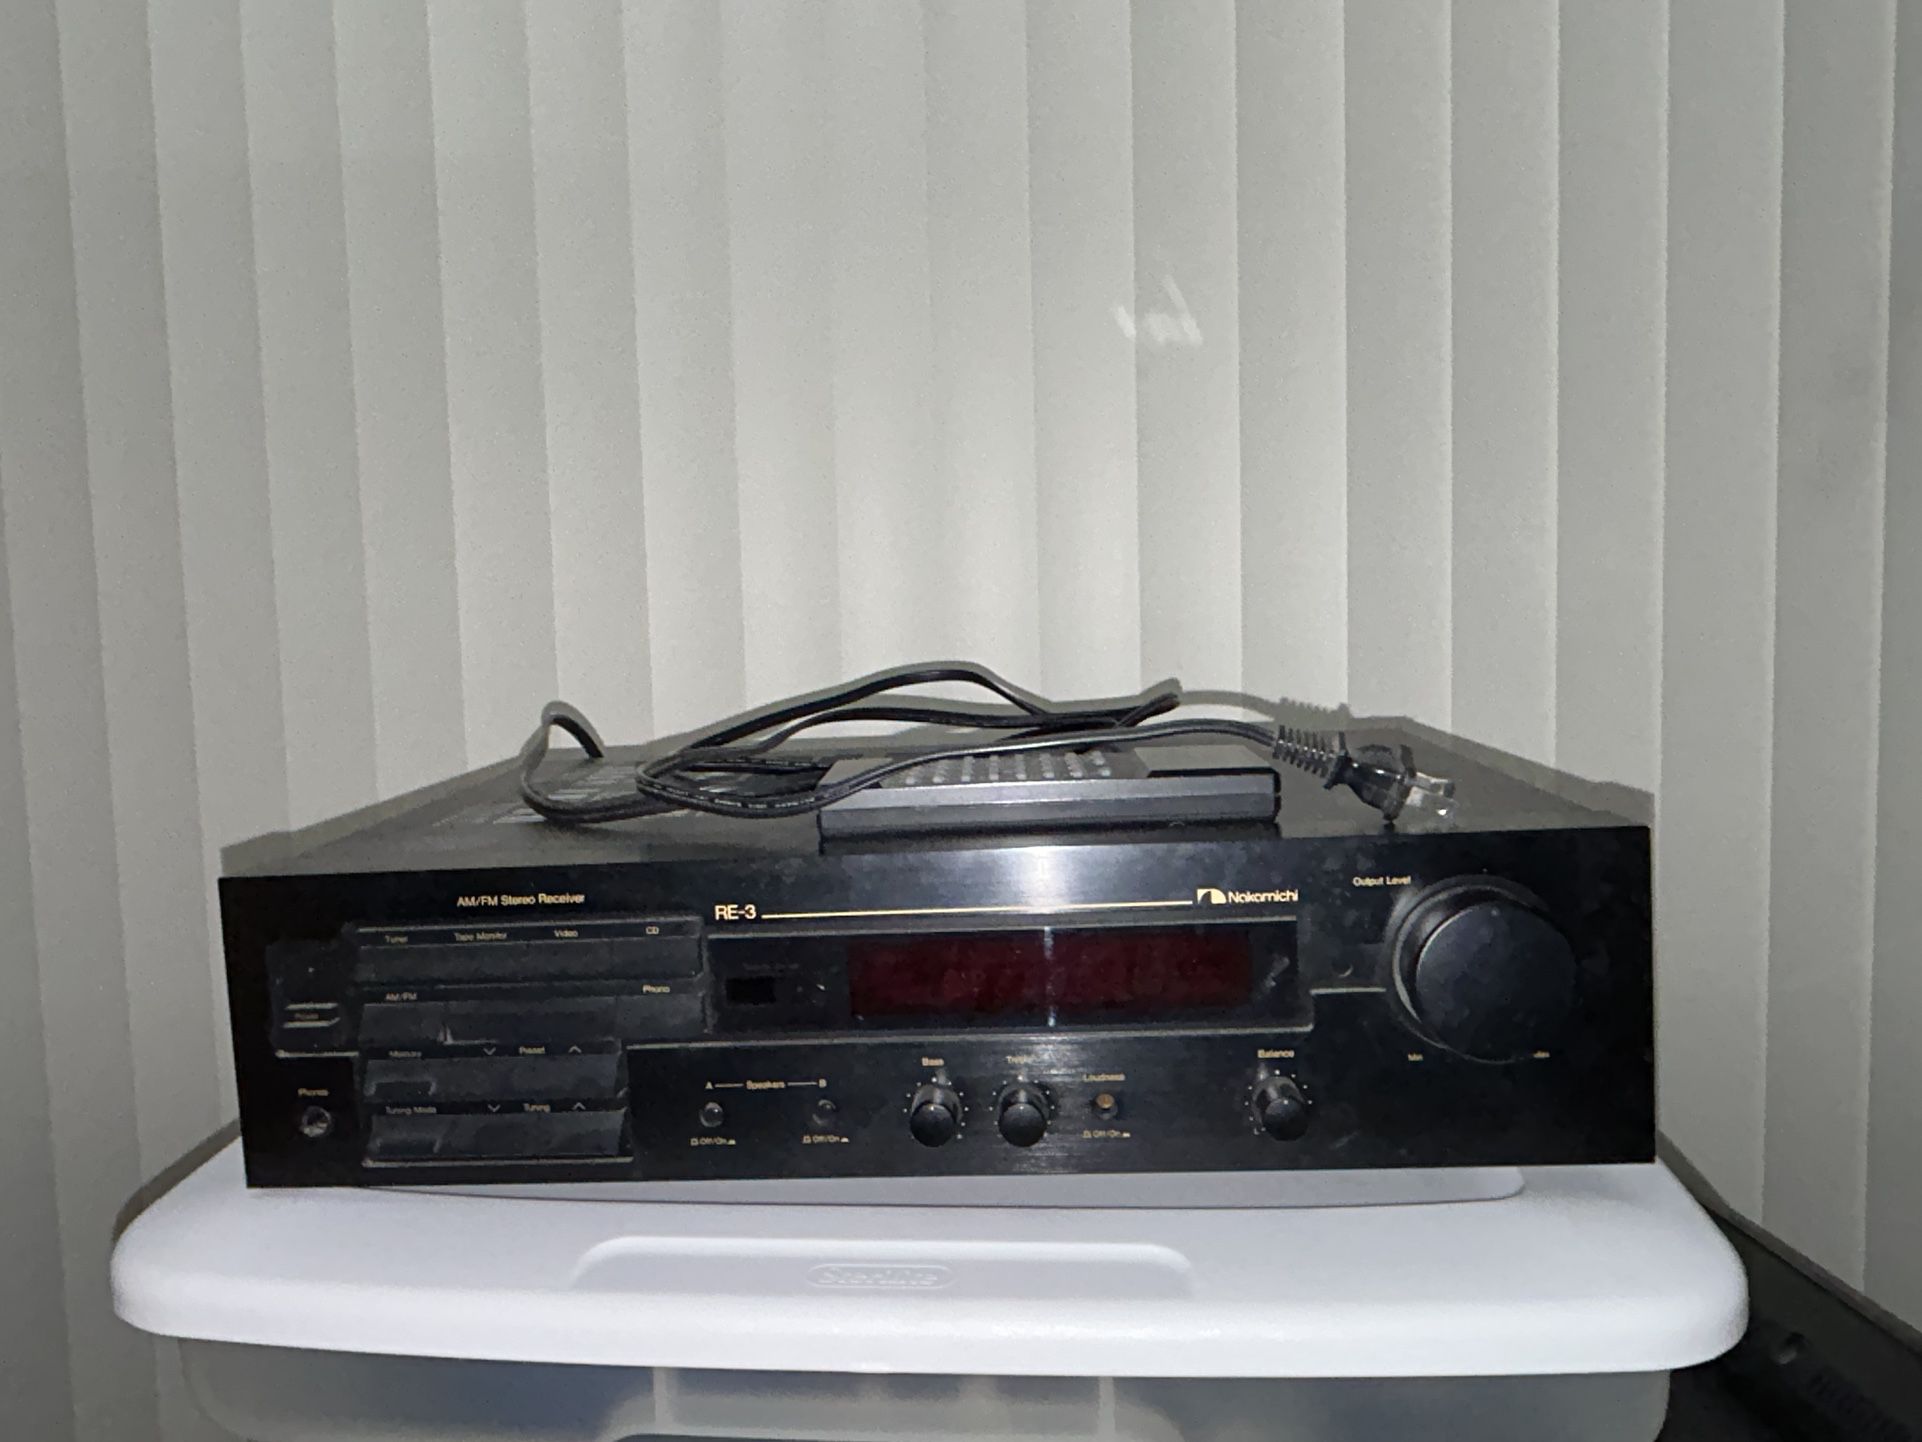 Nakamichi RE-3 AM FM Stereo Receiver With Remote